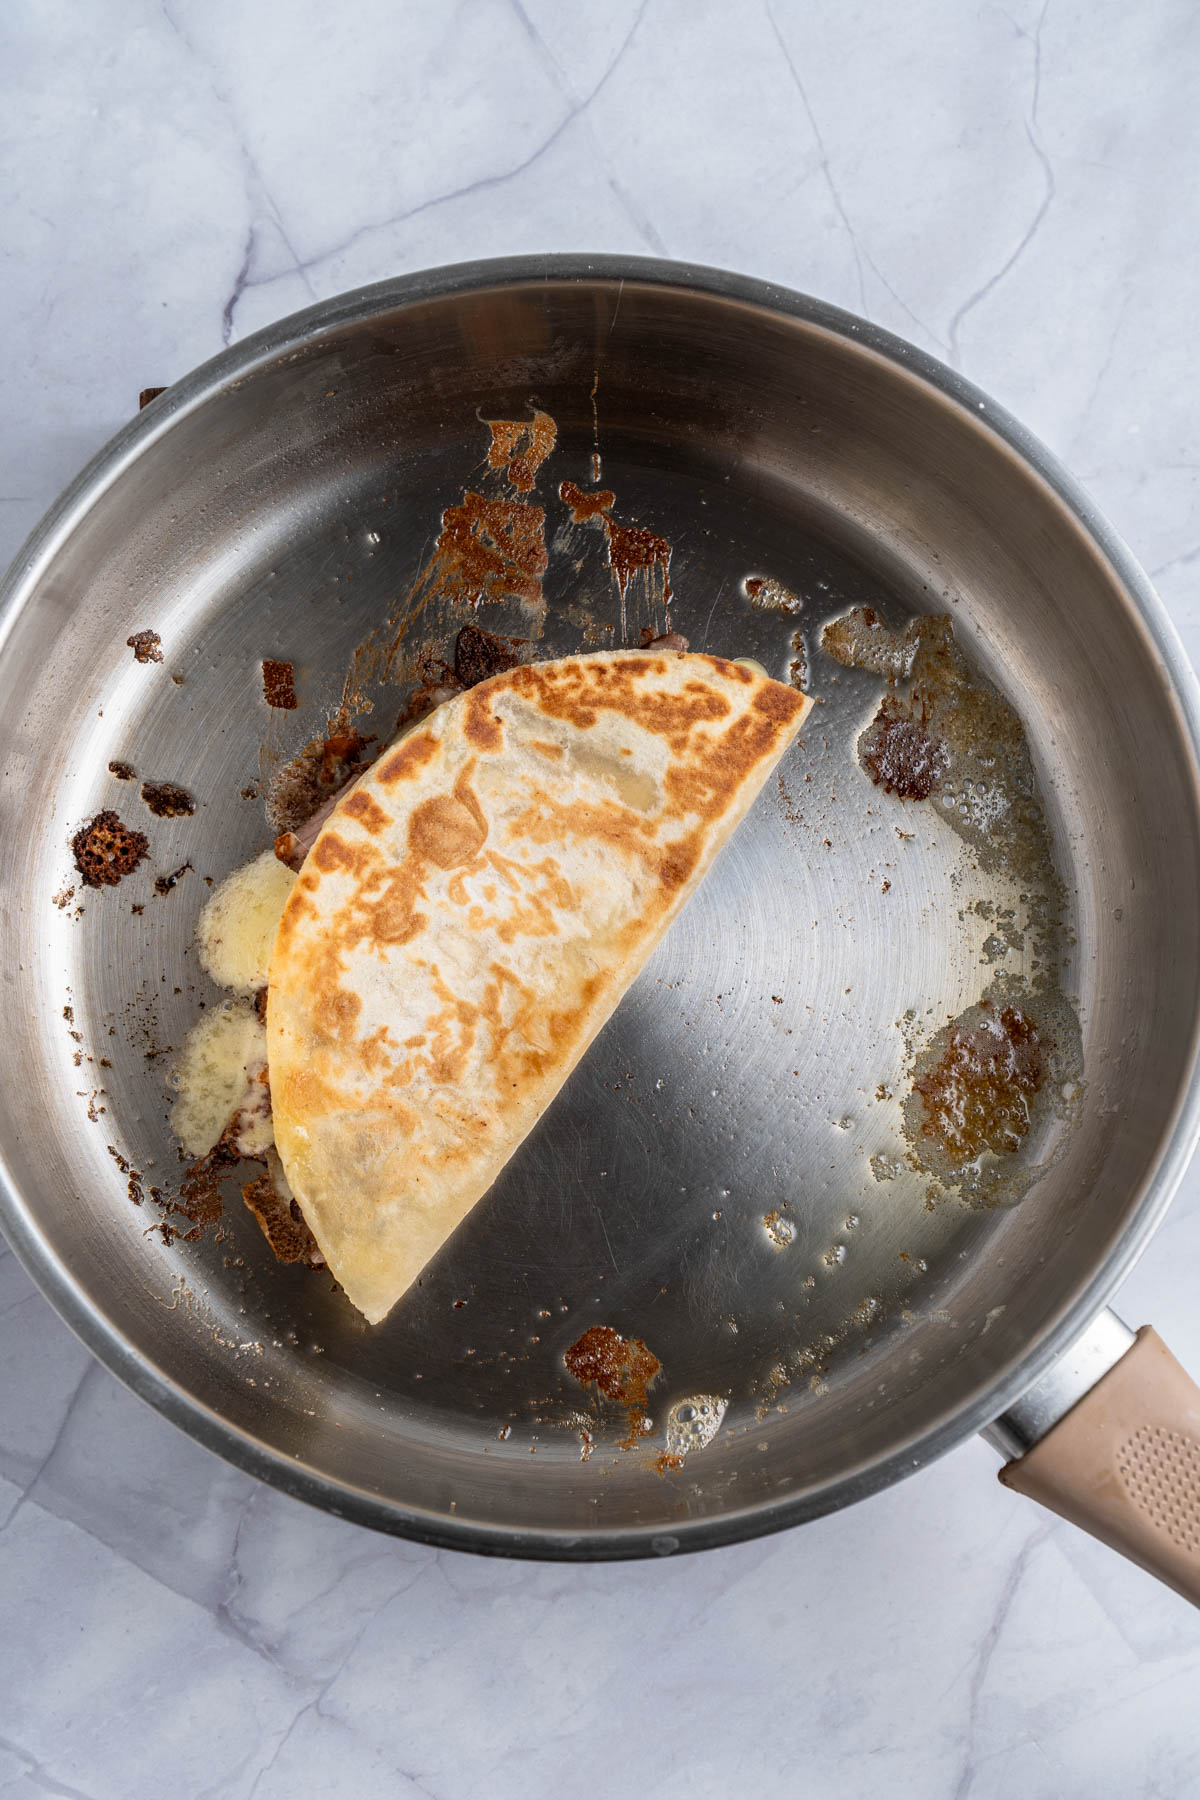 A quesadilla halved in a frying pan.